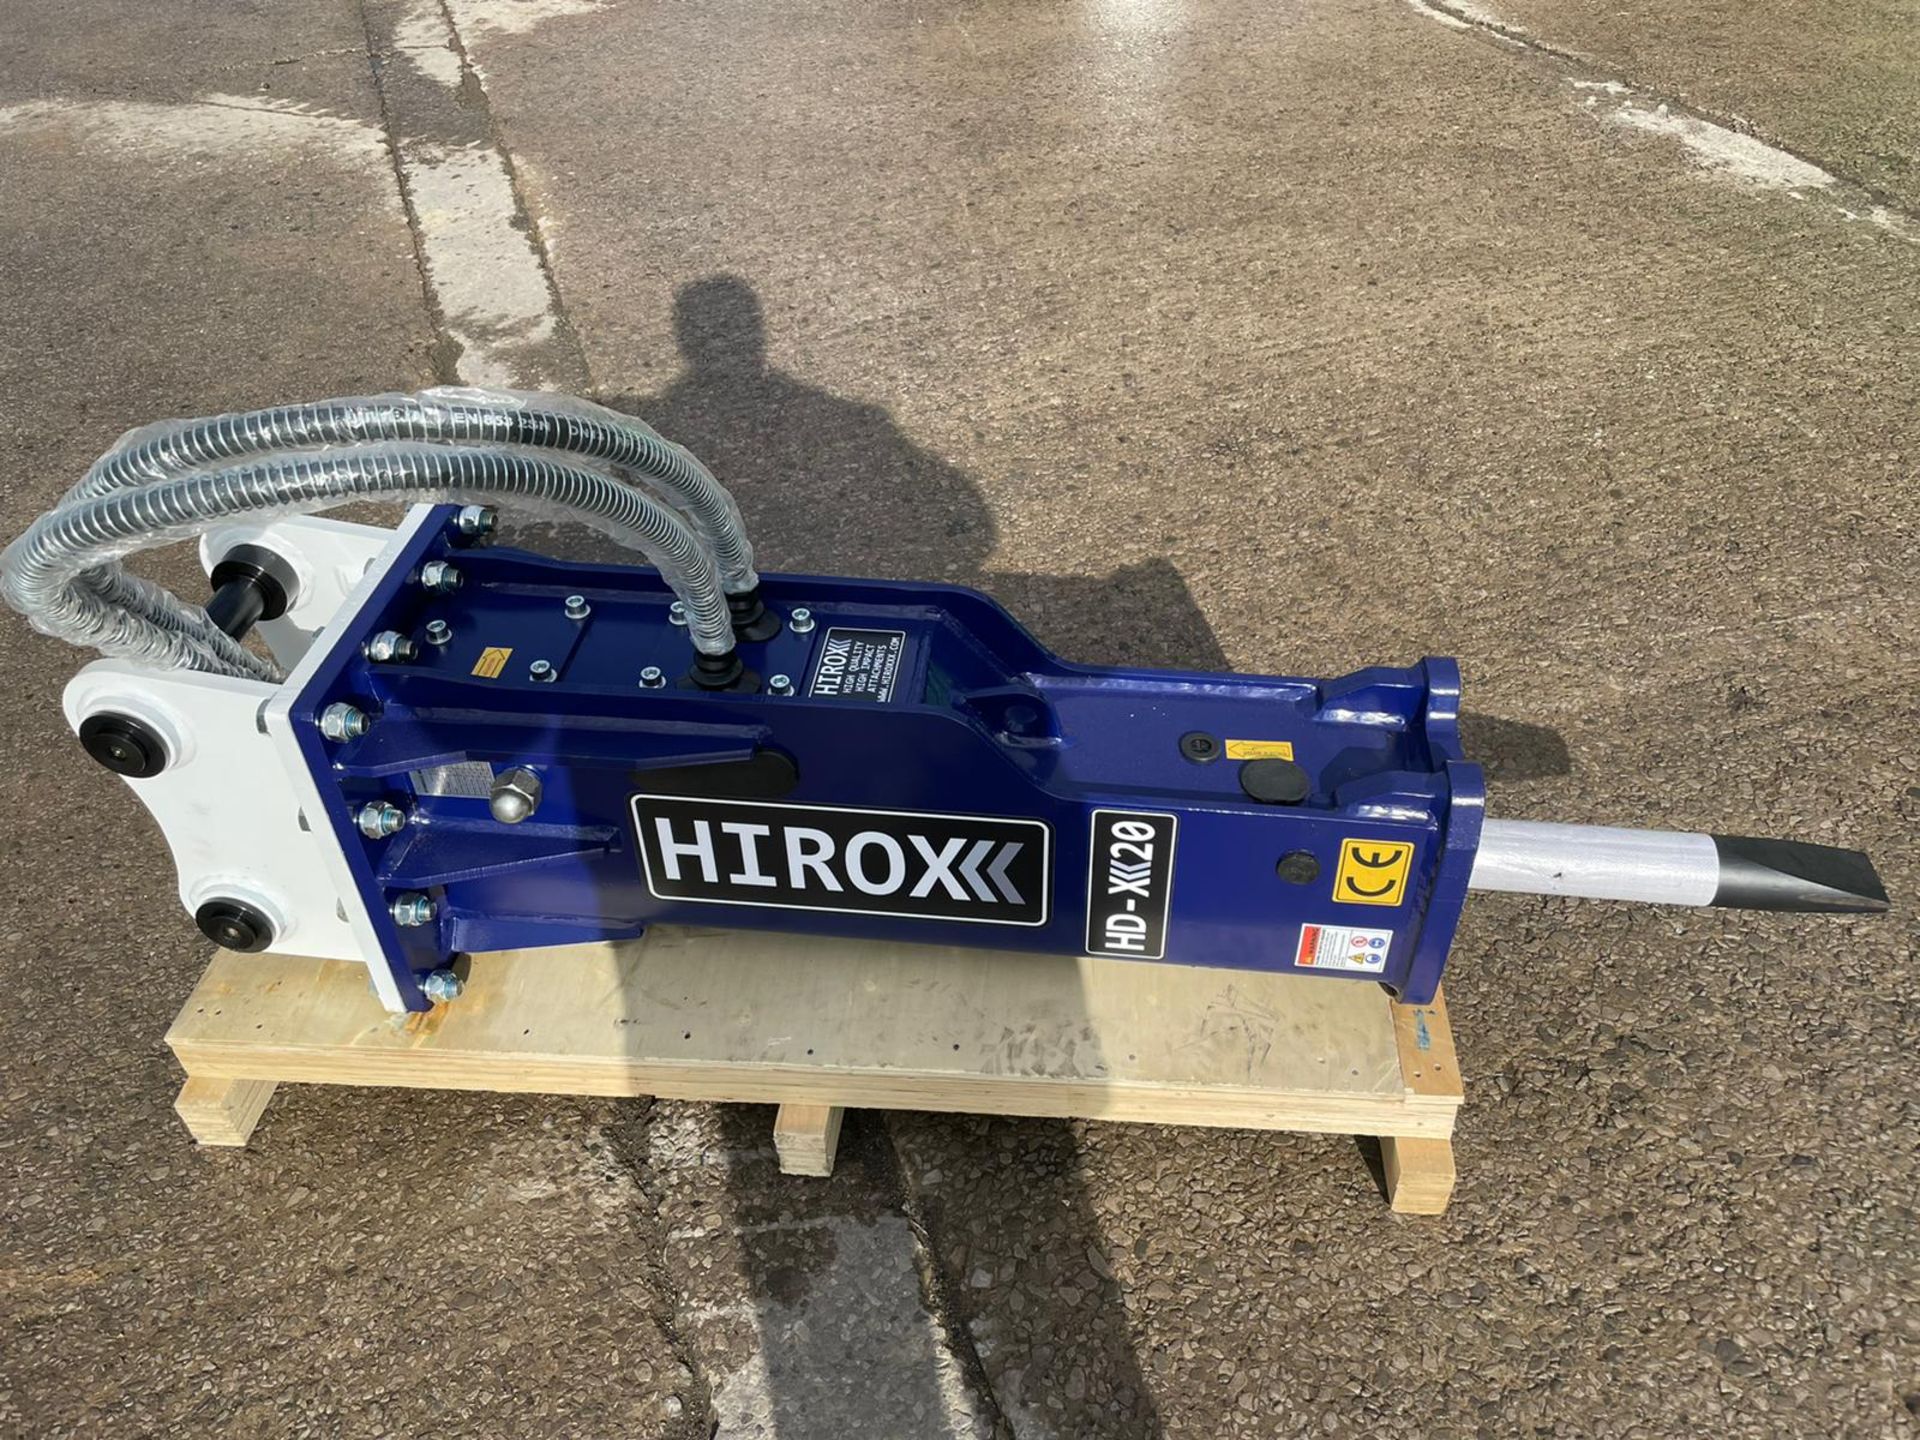 Hirox hdx-20 to suit 4-8 ton